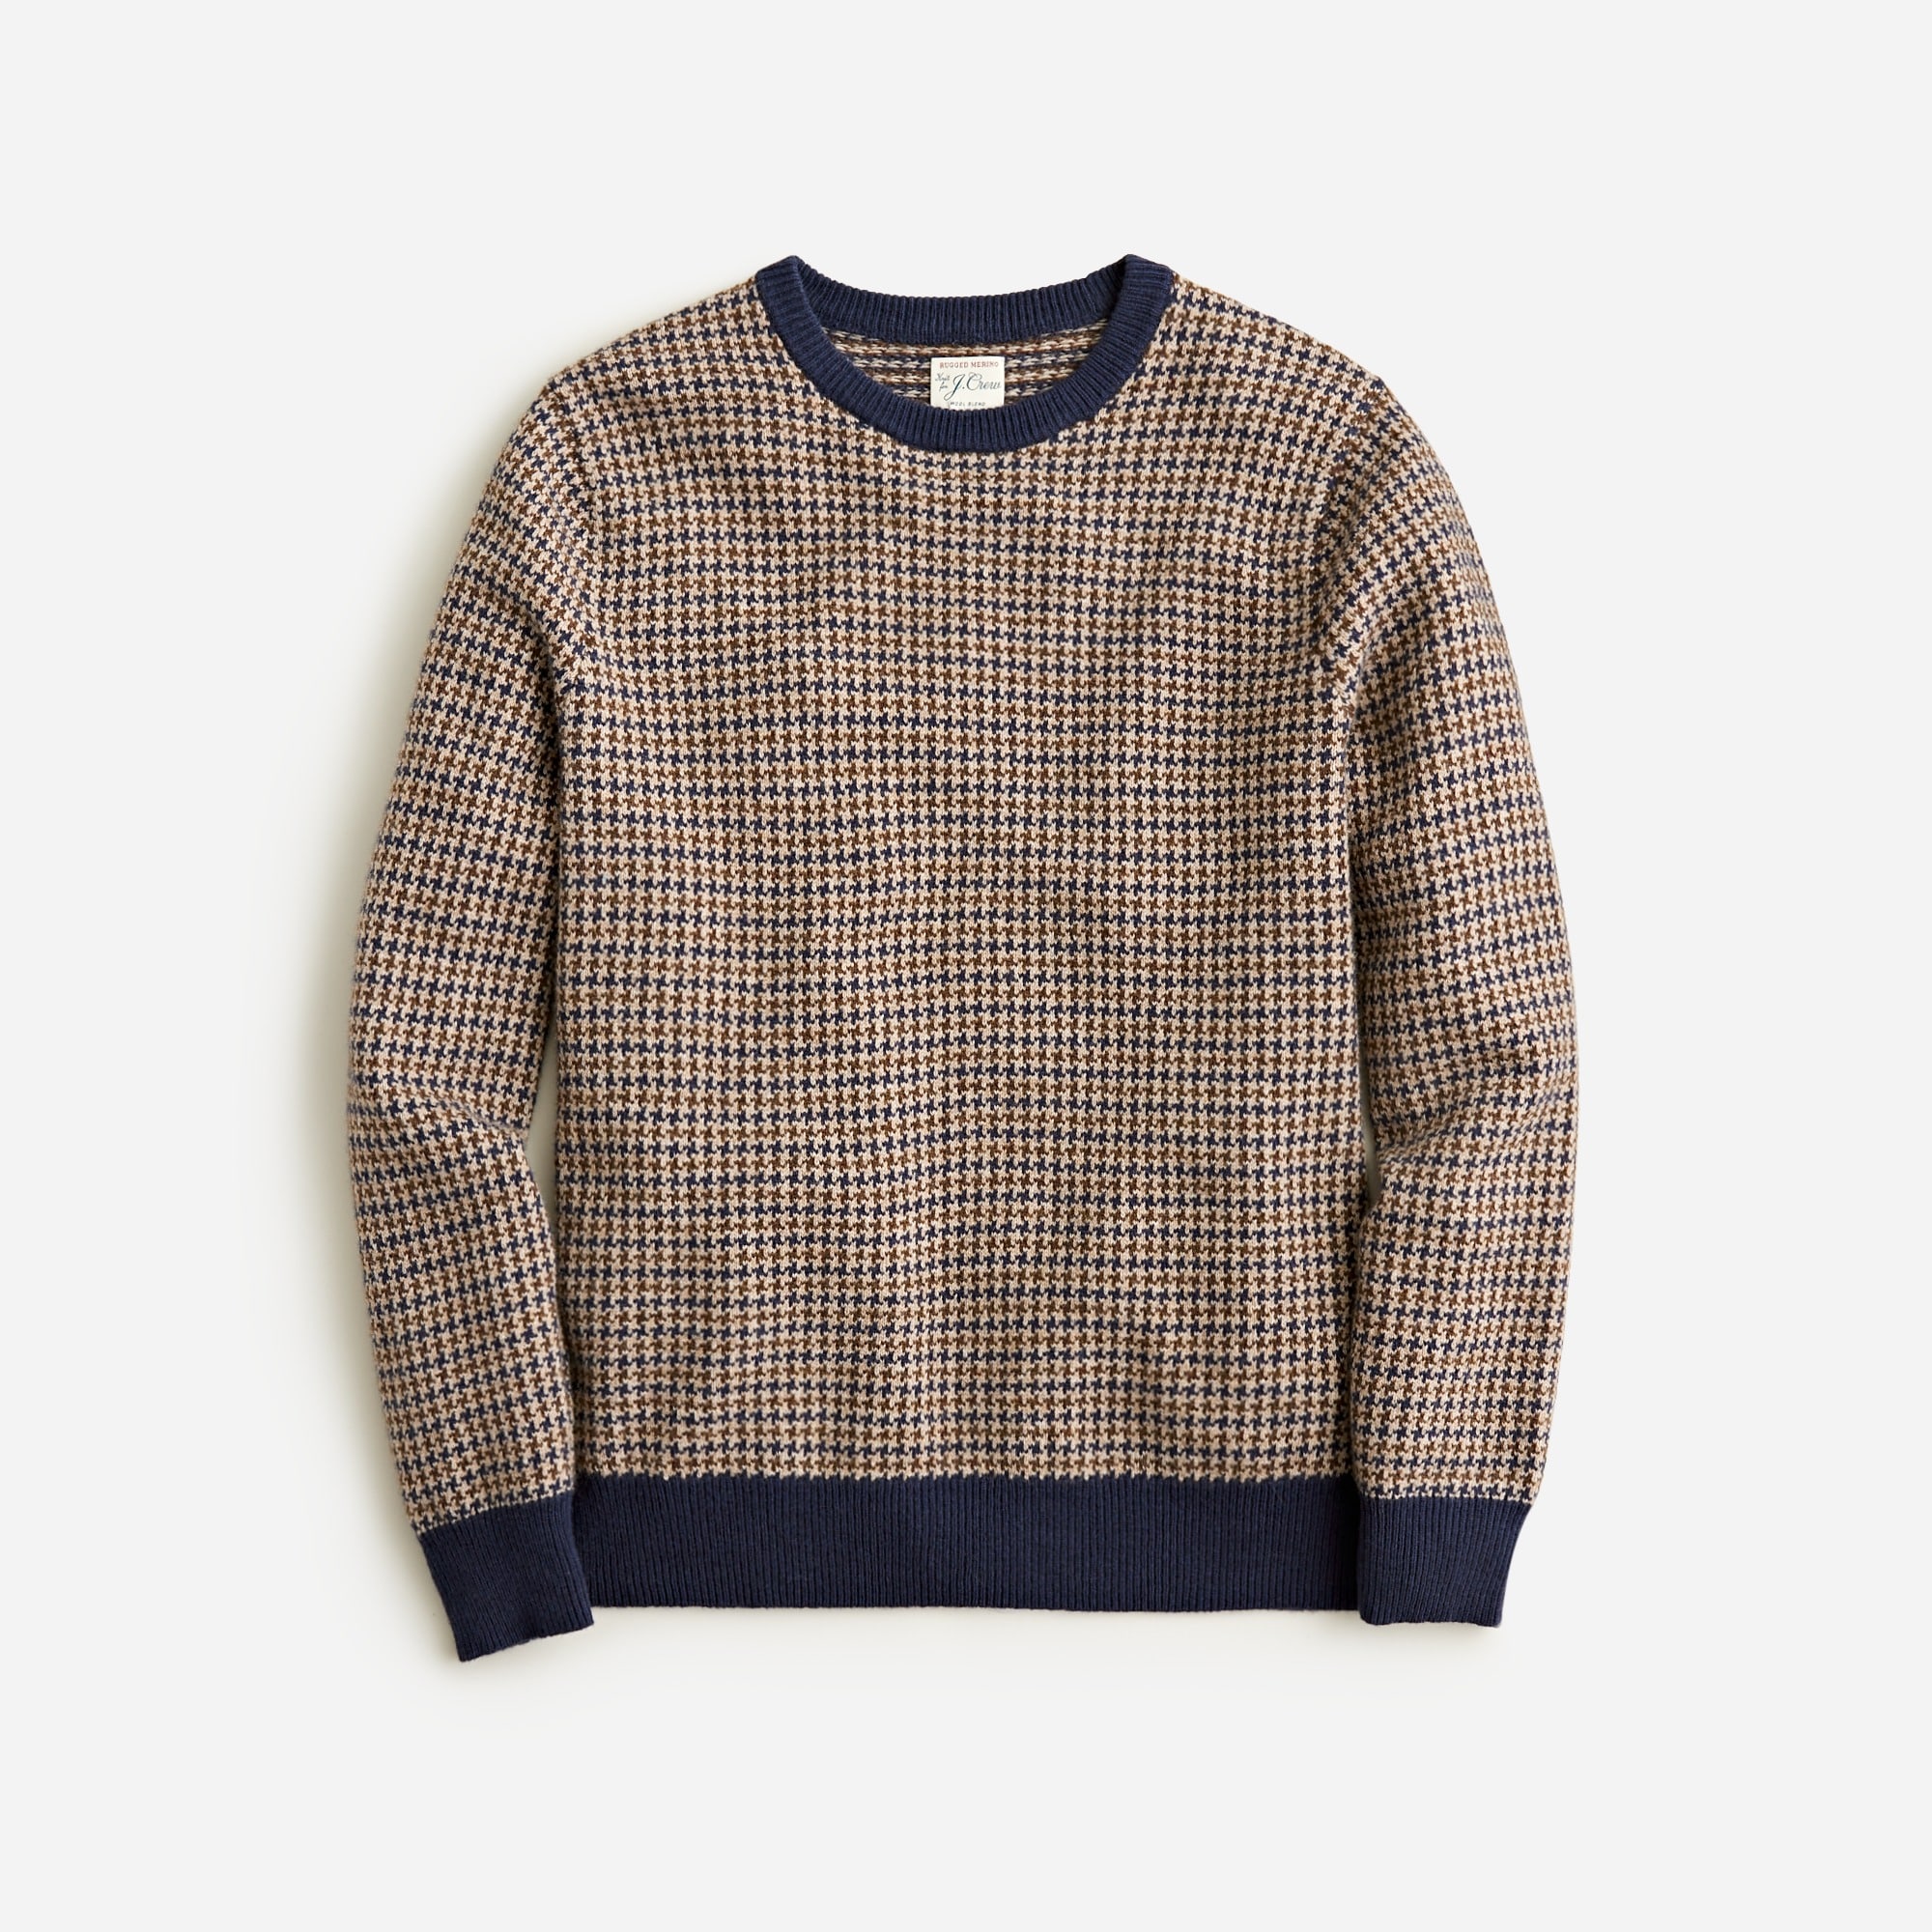 mens Merino wool-blend sweater in houndstooth jacquard